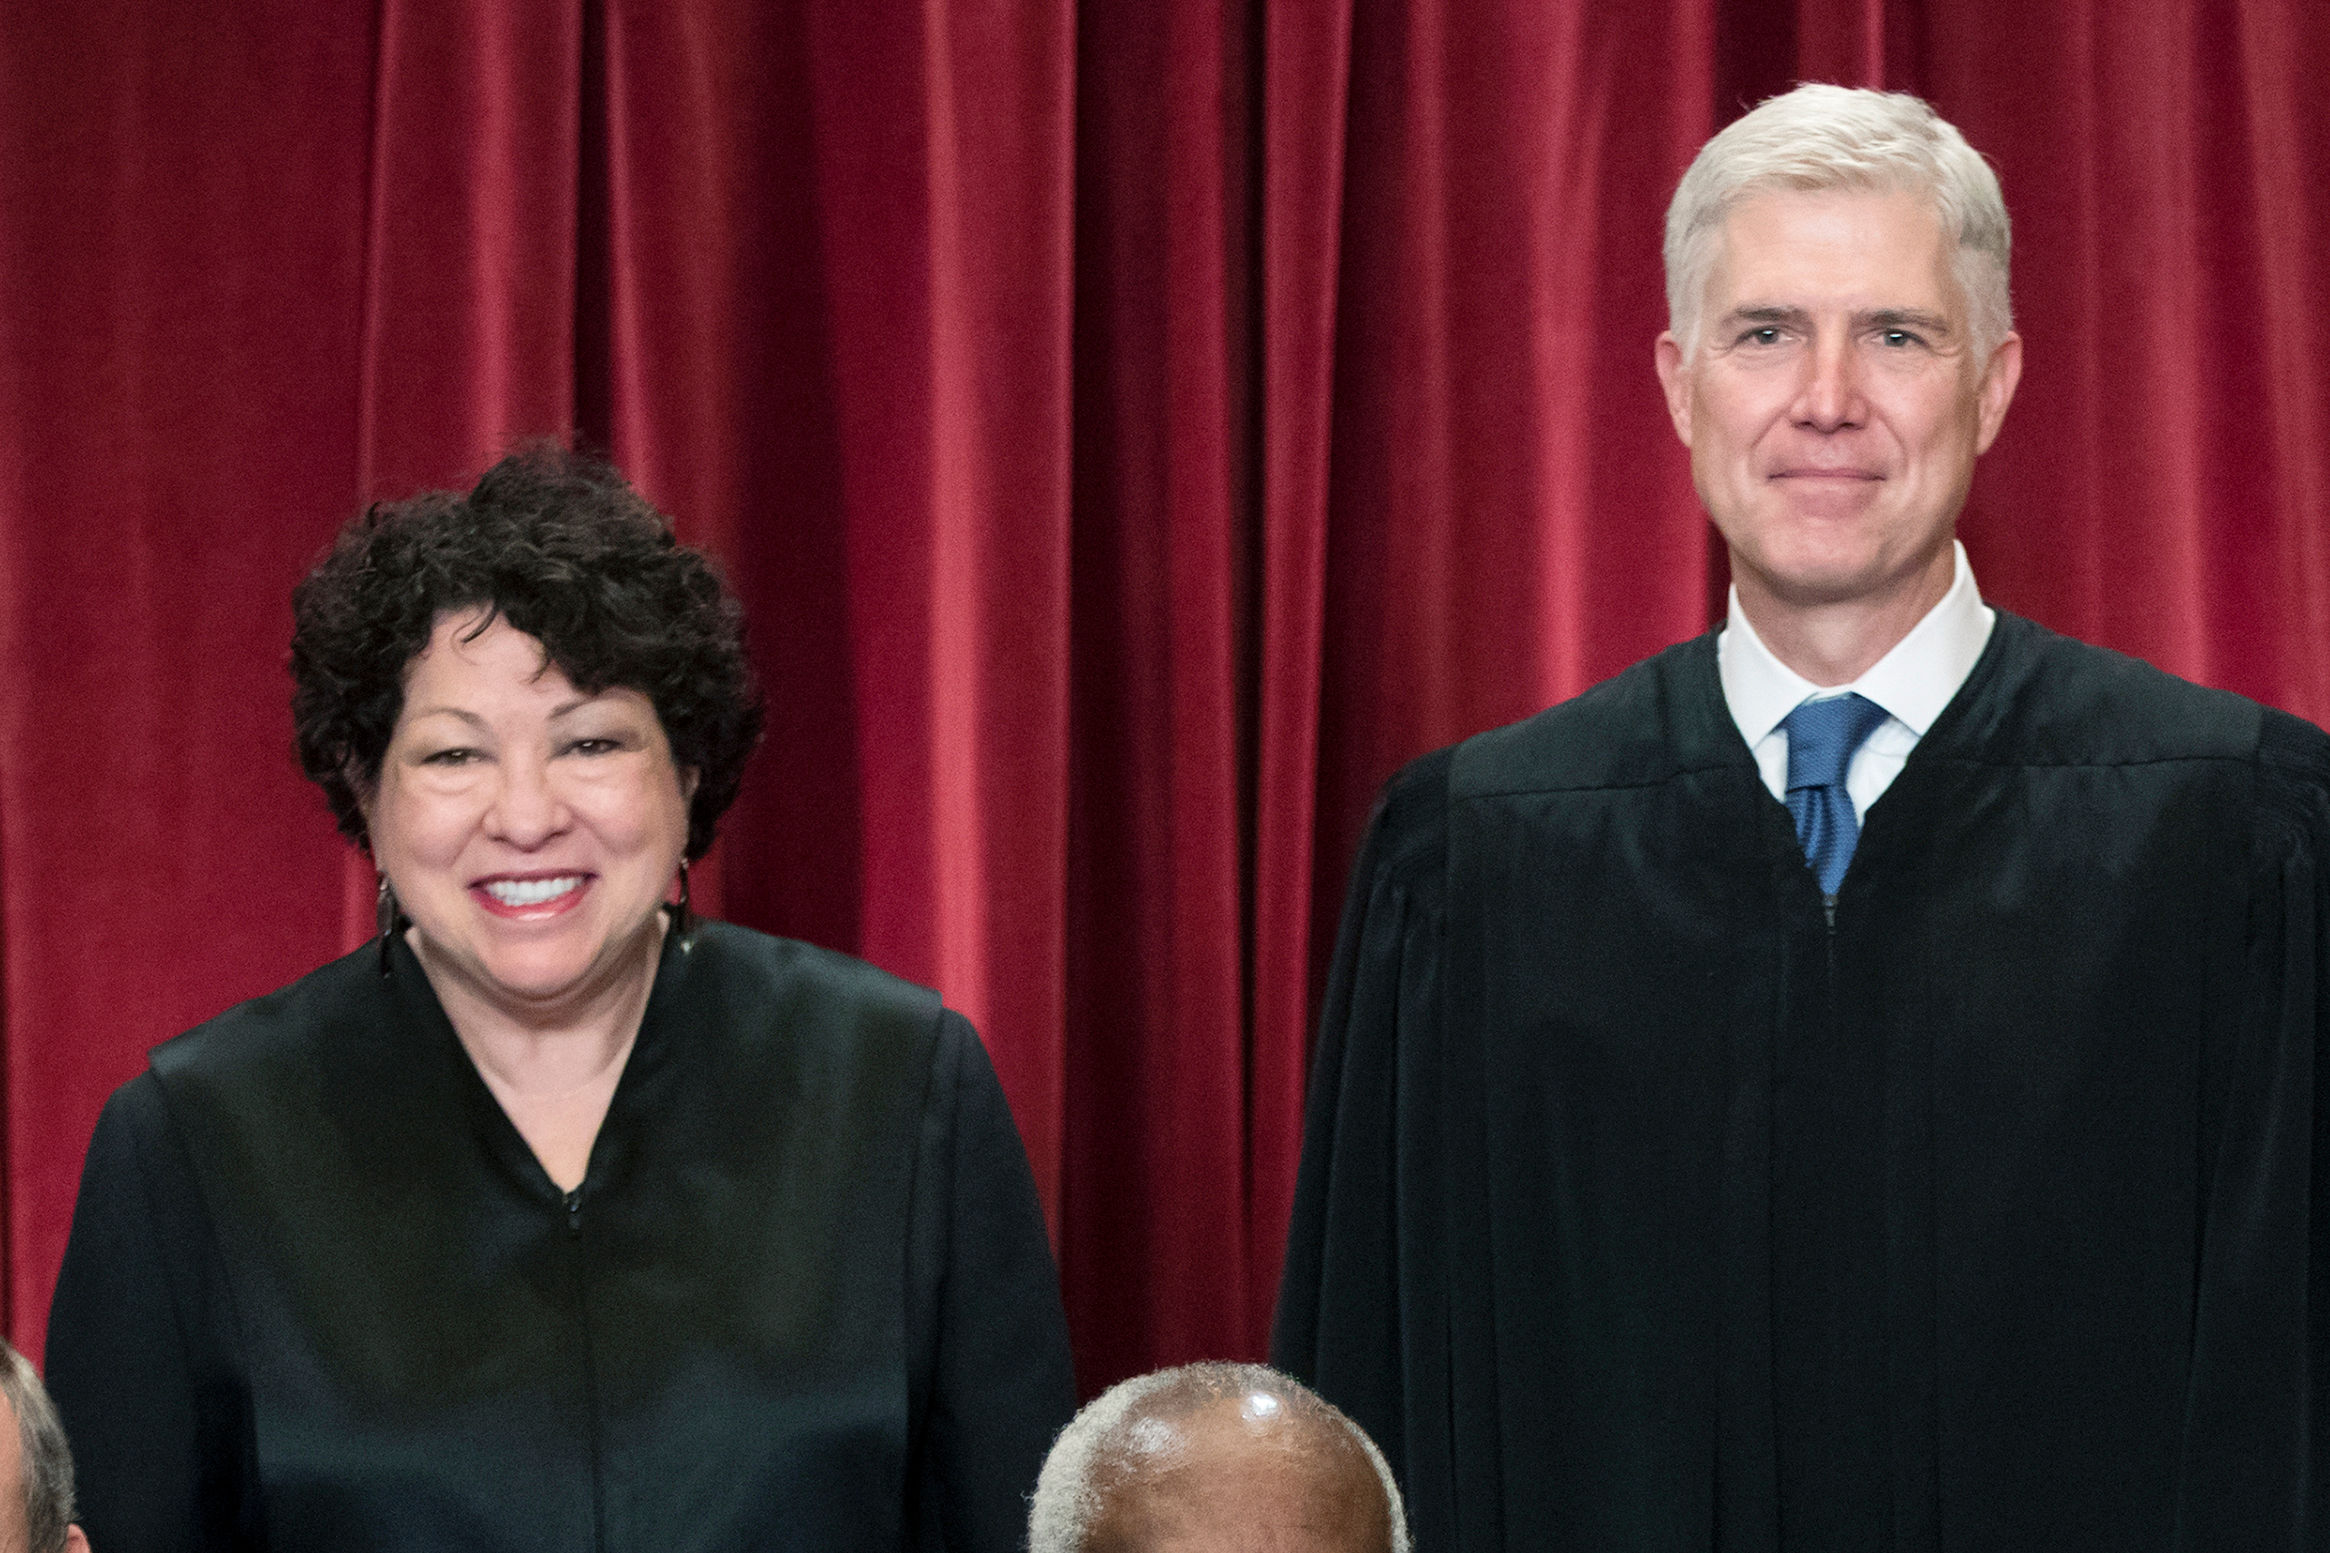 US Supreme Court Justices Sonia Sotomayor, Neil Gorsuch dismiss reports of rift over mask wearing